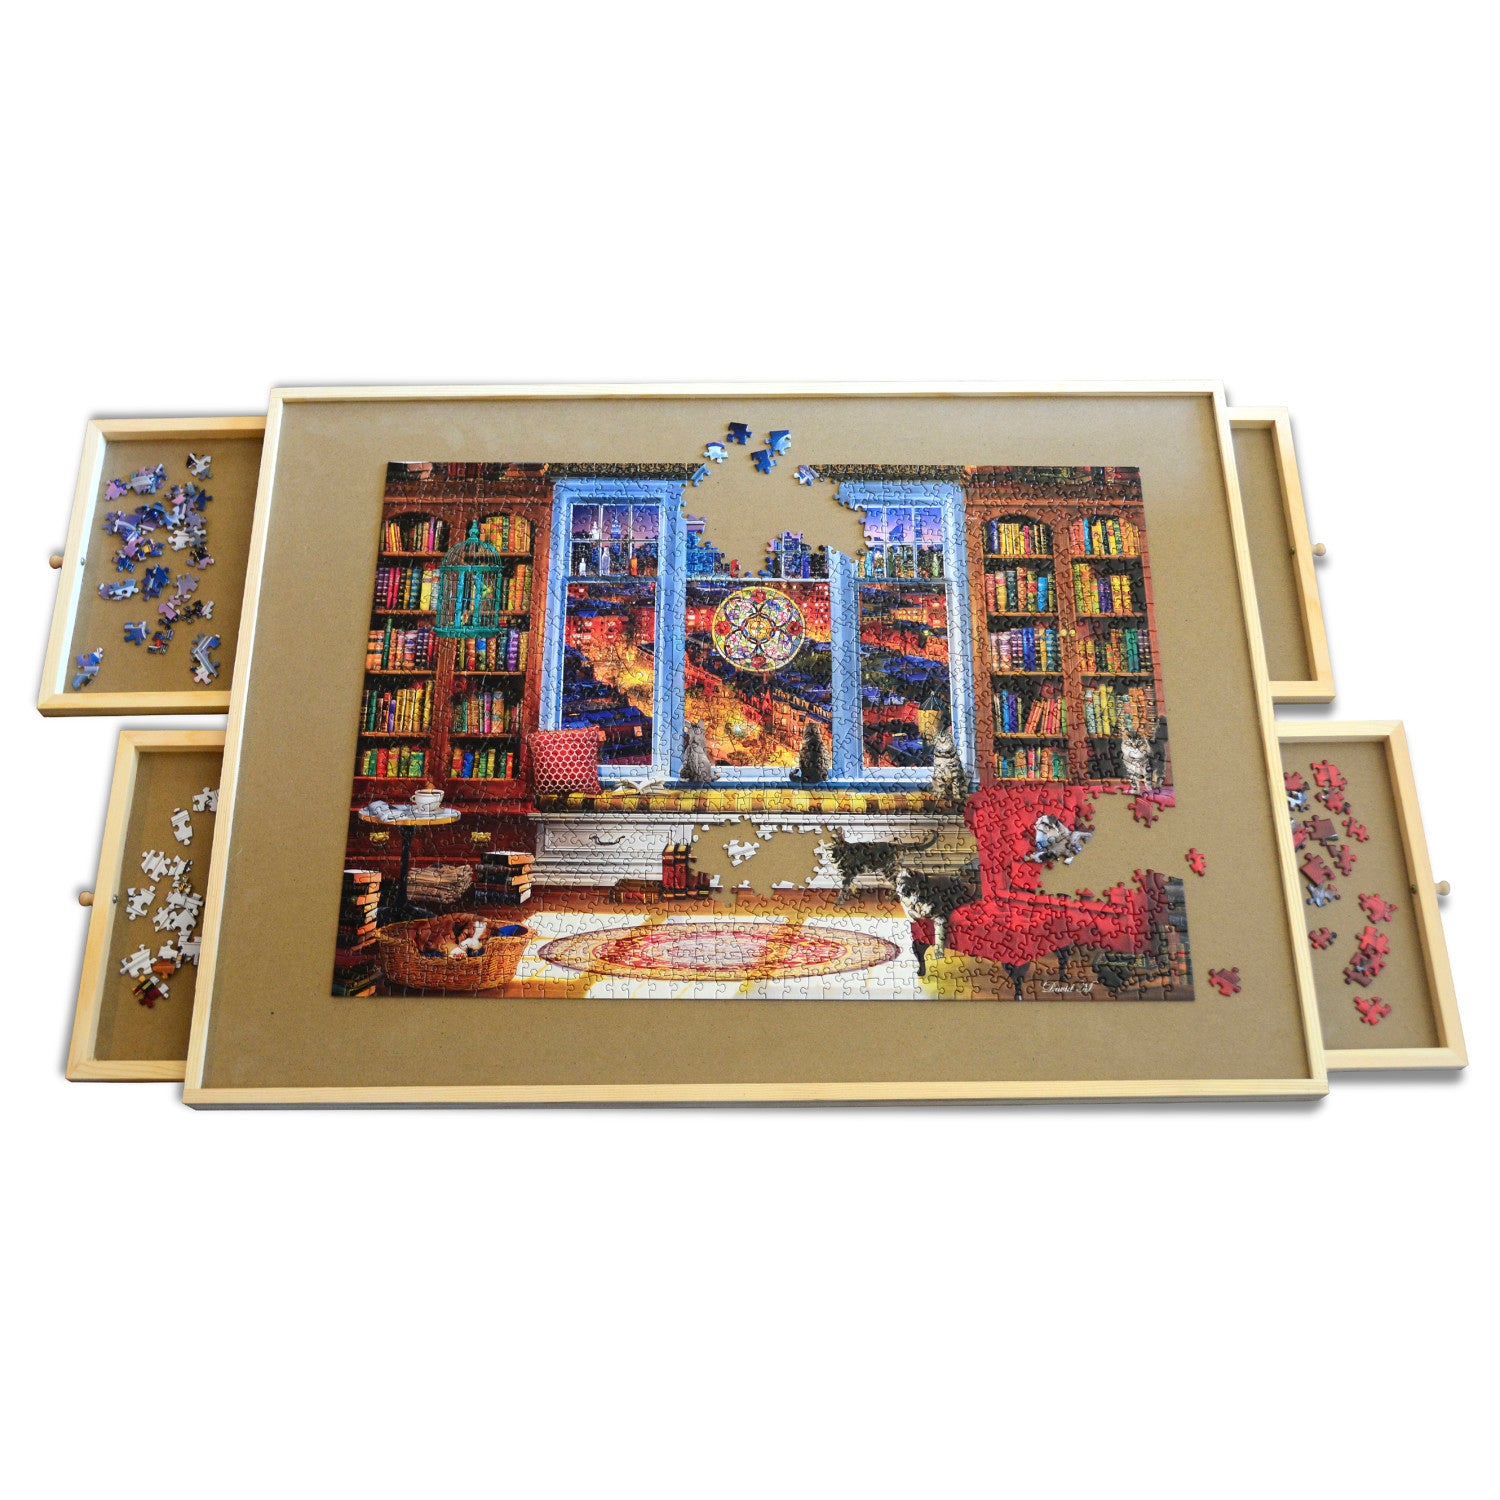  Bits and Pieces - Puzzle Expert Tabletop Easel - Non